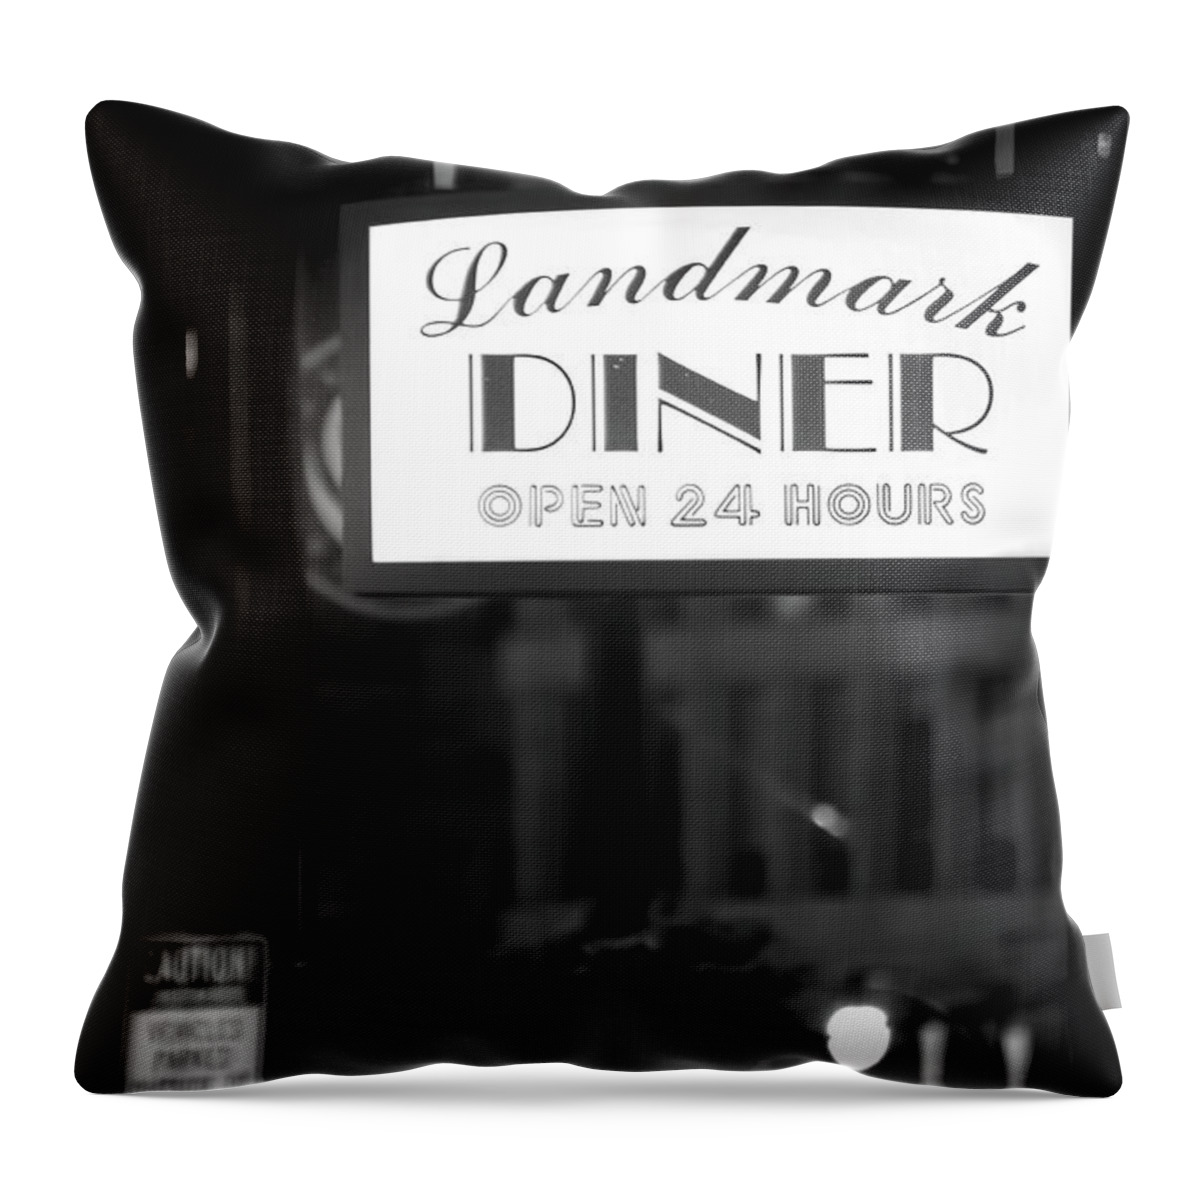 Landmark Diner Throw Pillow featuring the photograph Landmark Diner by Mark Andrew Thomas